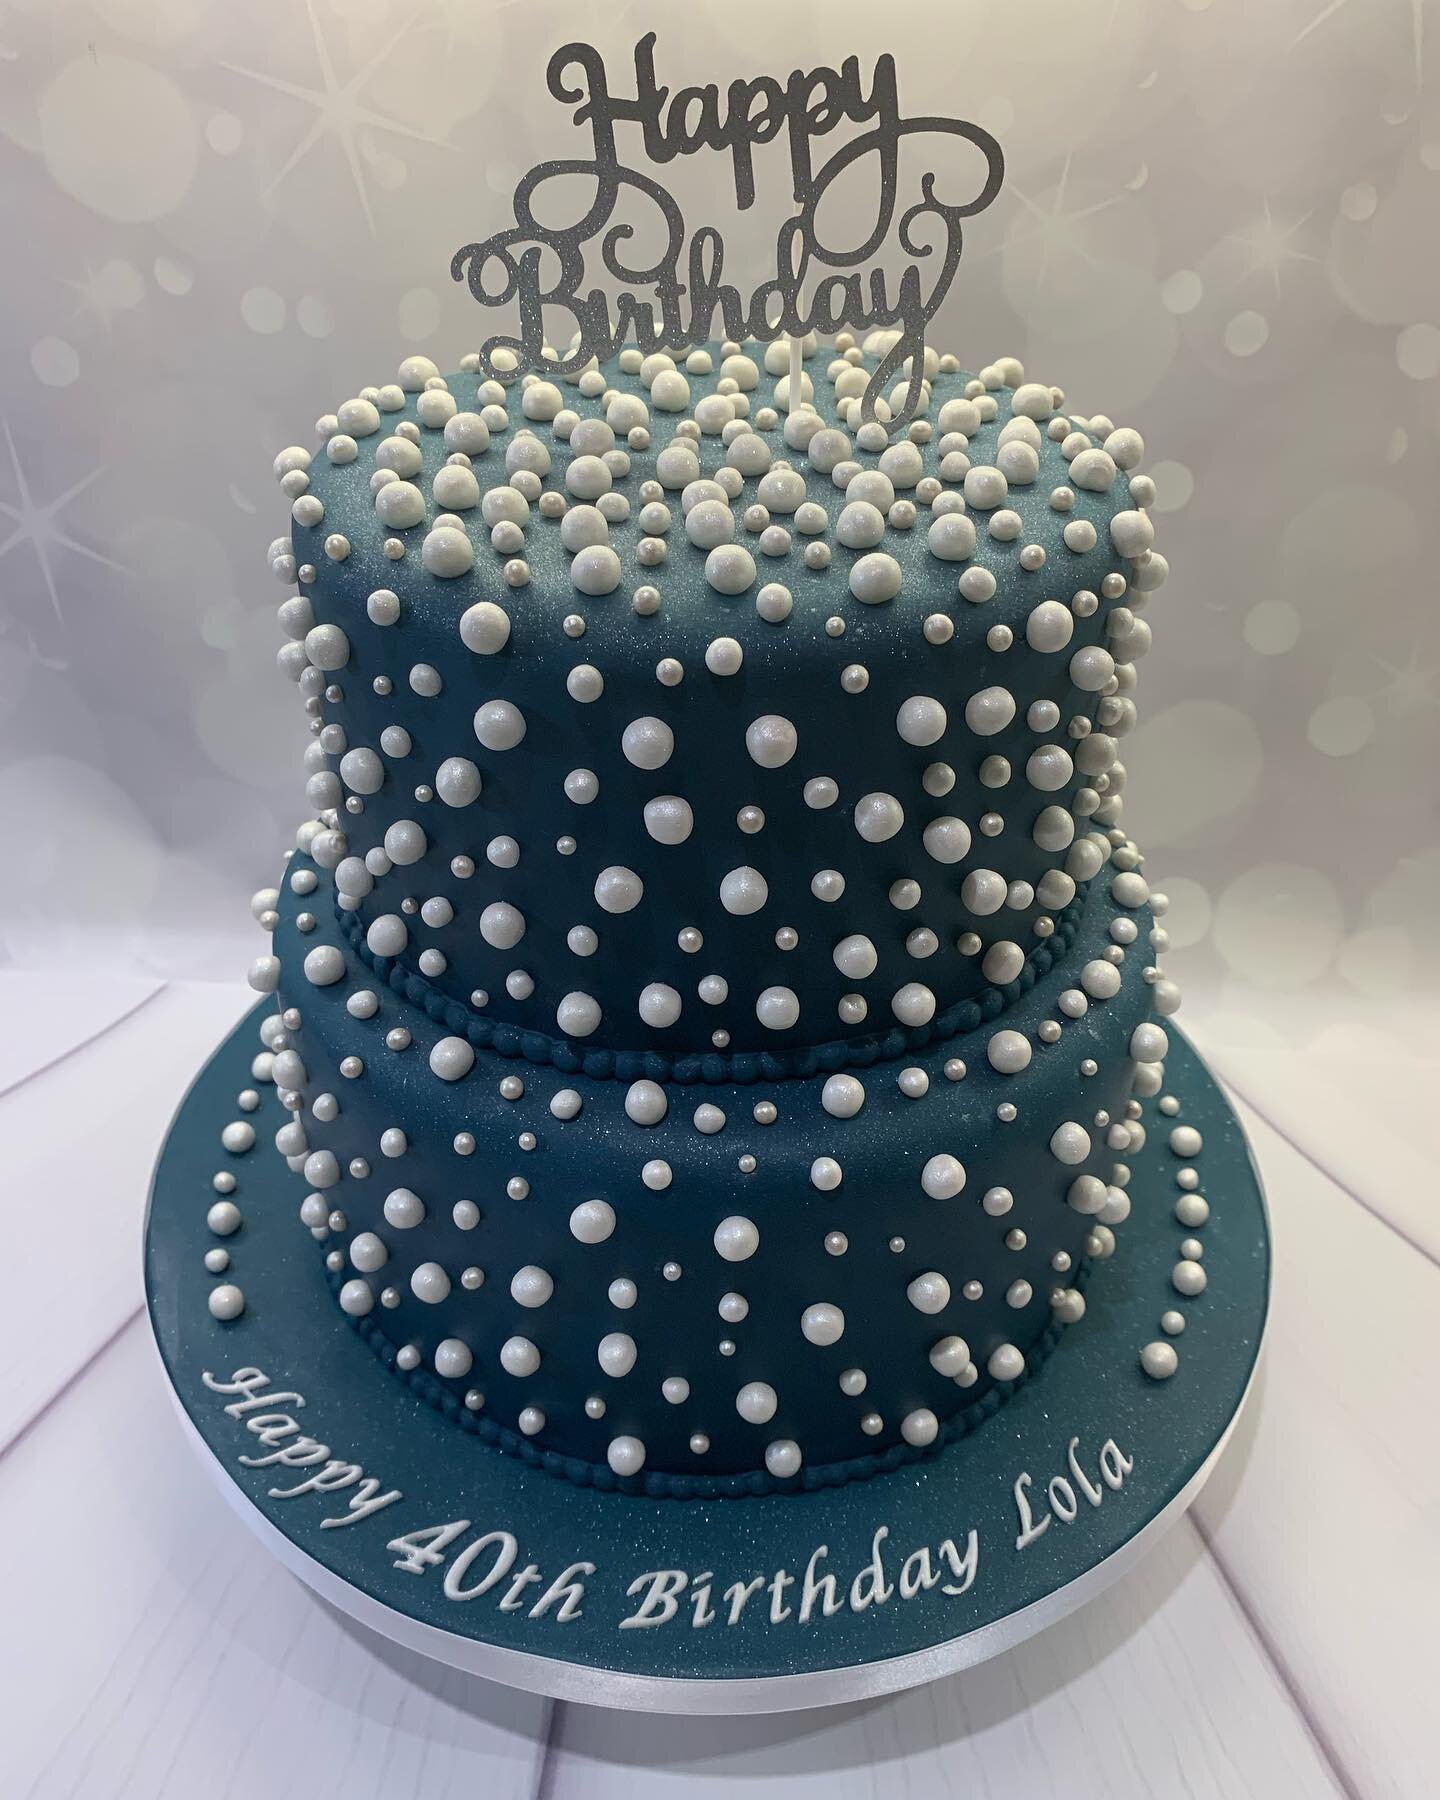 Lola had this midnight blue and Pearl two tier cake for her 40th Birthday.  Hope you had a fantastic day. Xx